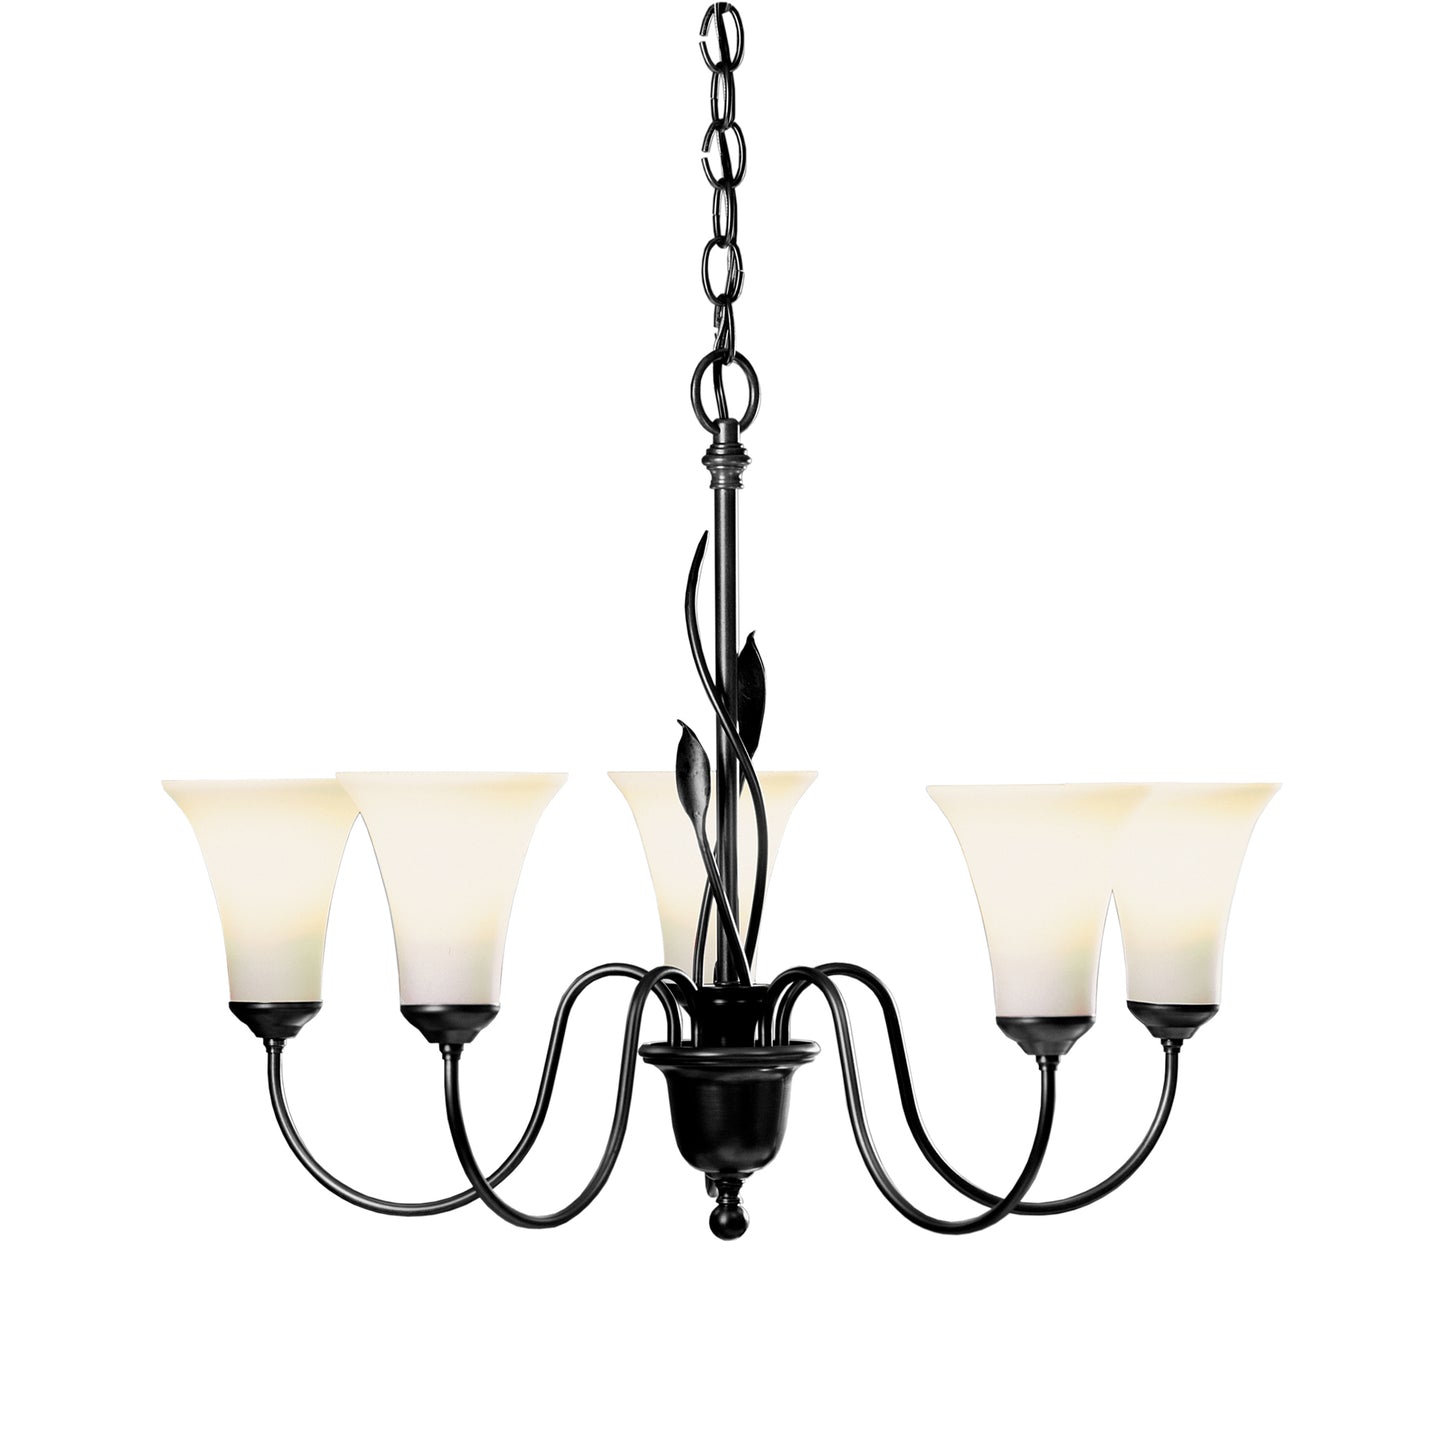 A Hubbardton Forge Forged Leaves 5-Arm Chandelier featuring white glass shades for soft illumination.